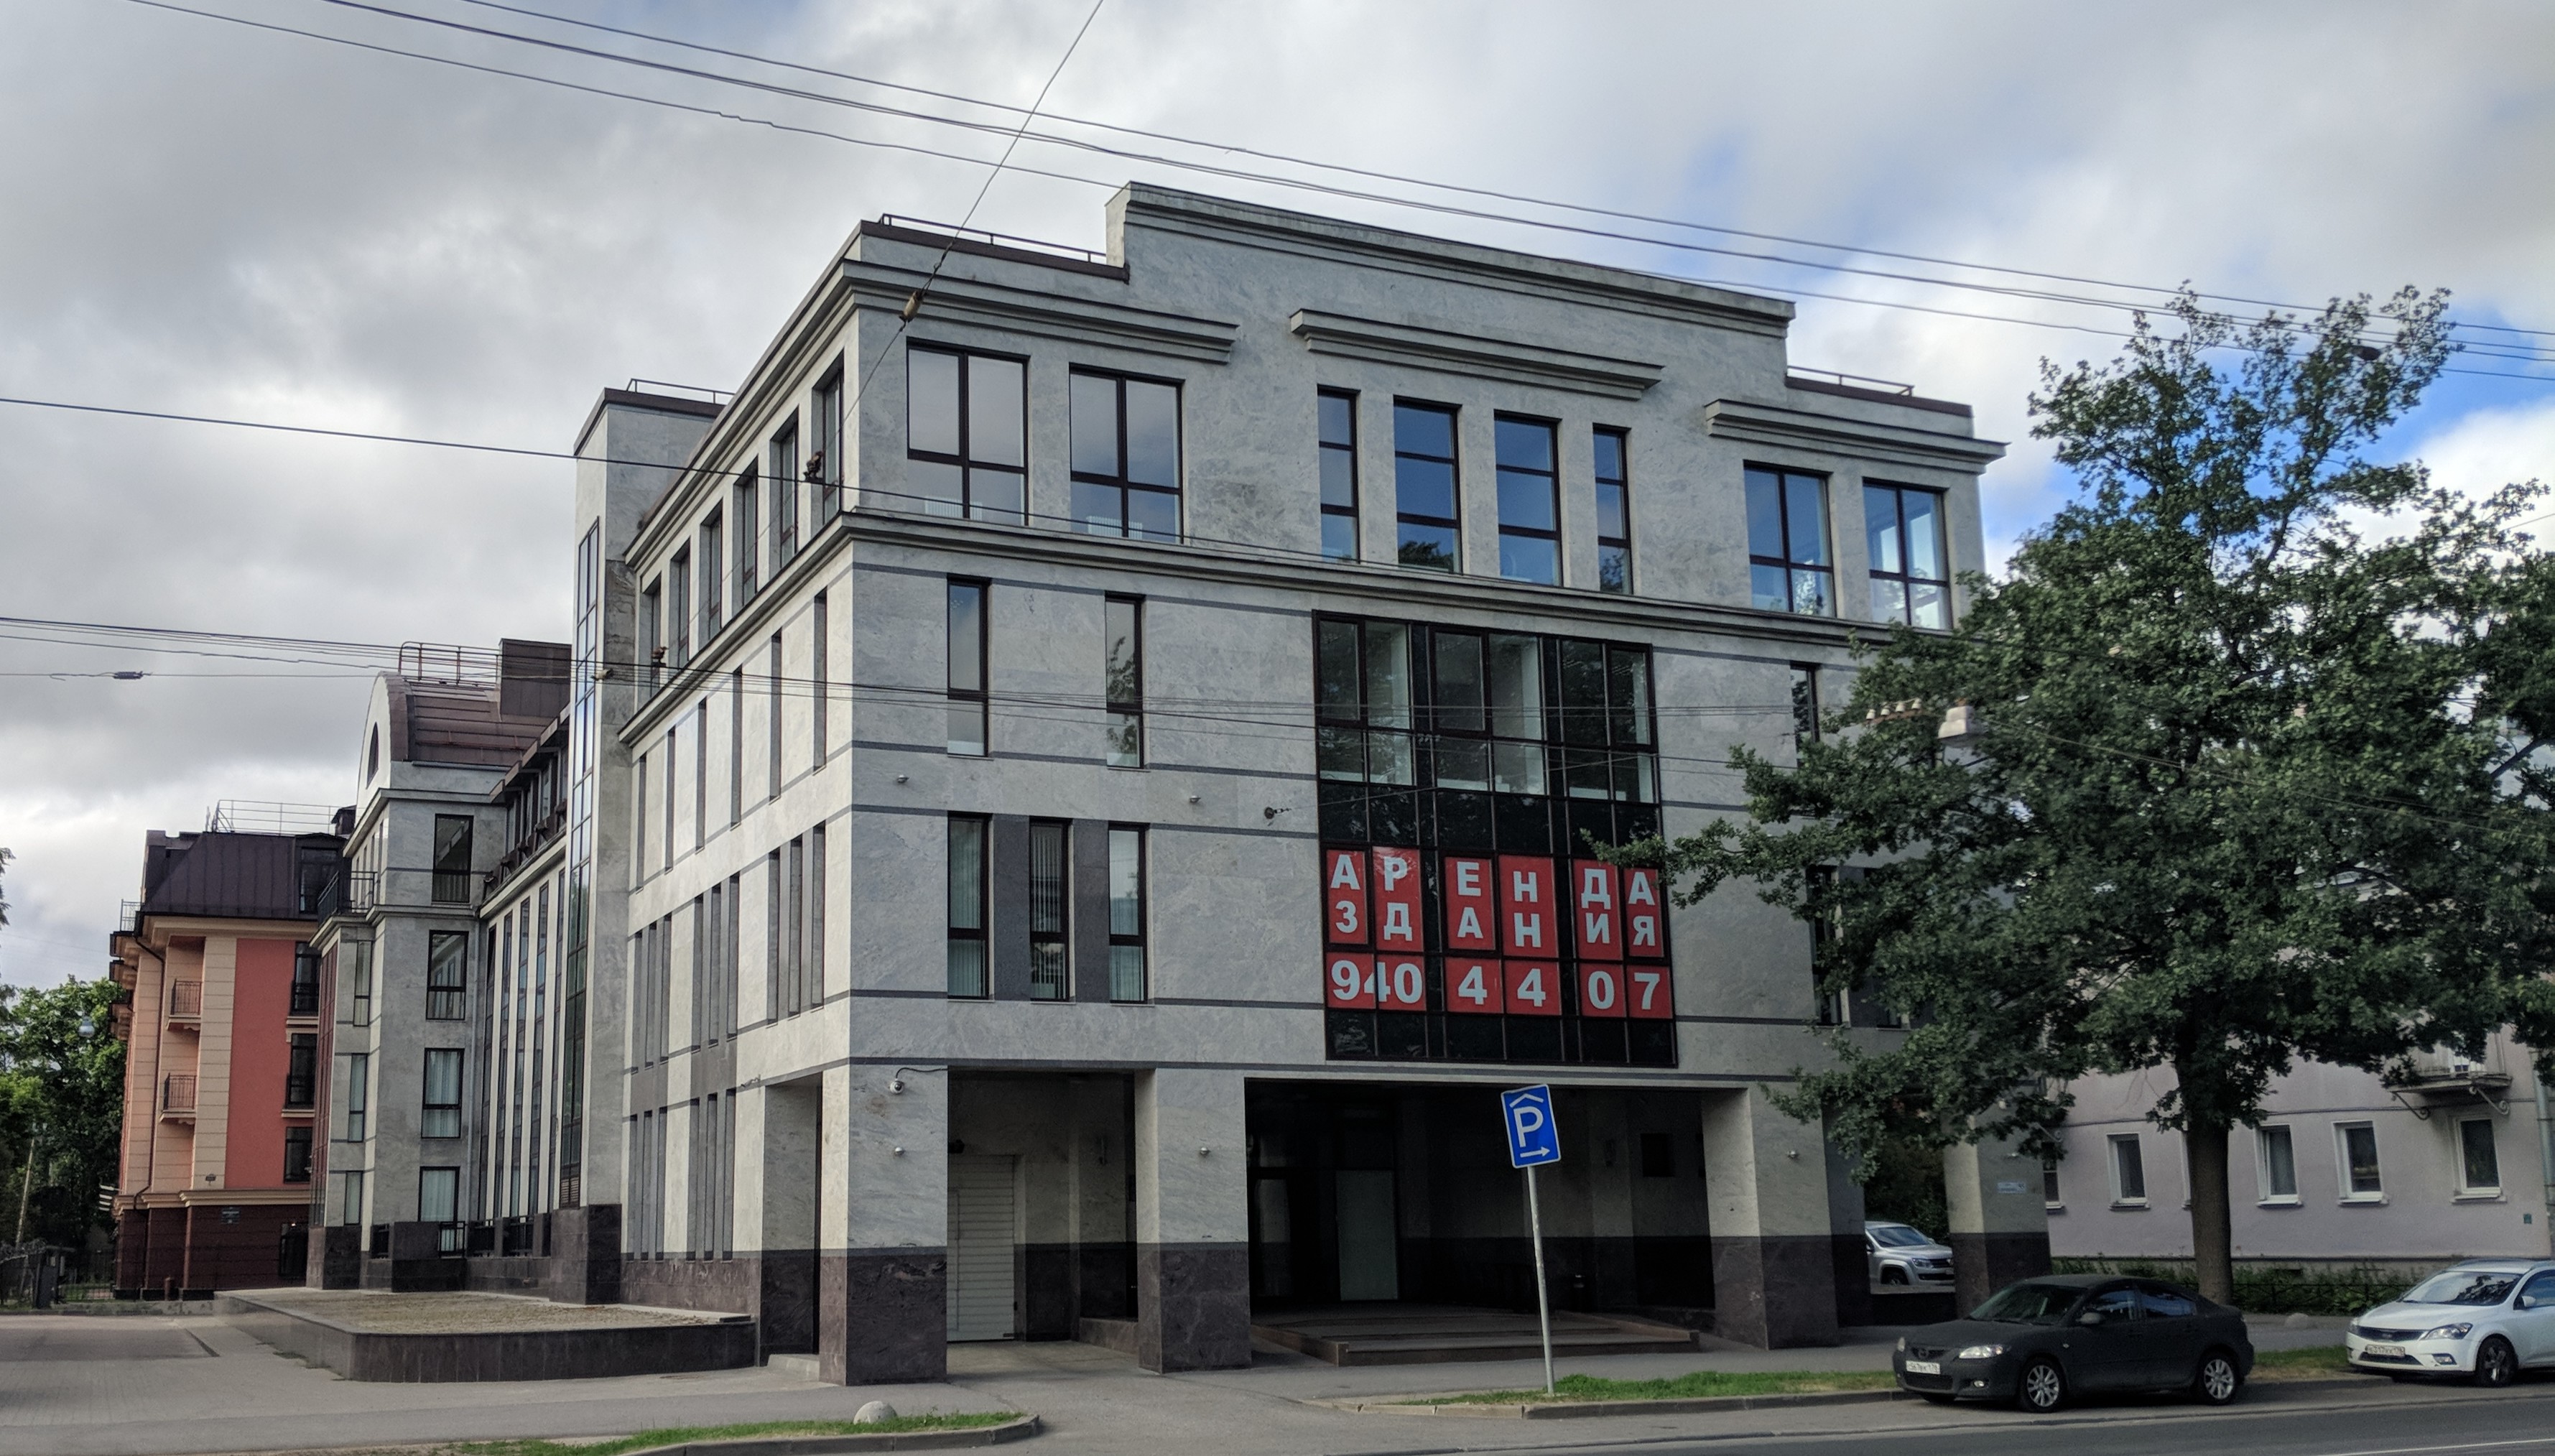 A photo of the former Internet Research Agency (IRA) building on Savushkina Street in St. Petersburg, Russia.